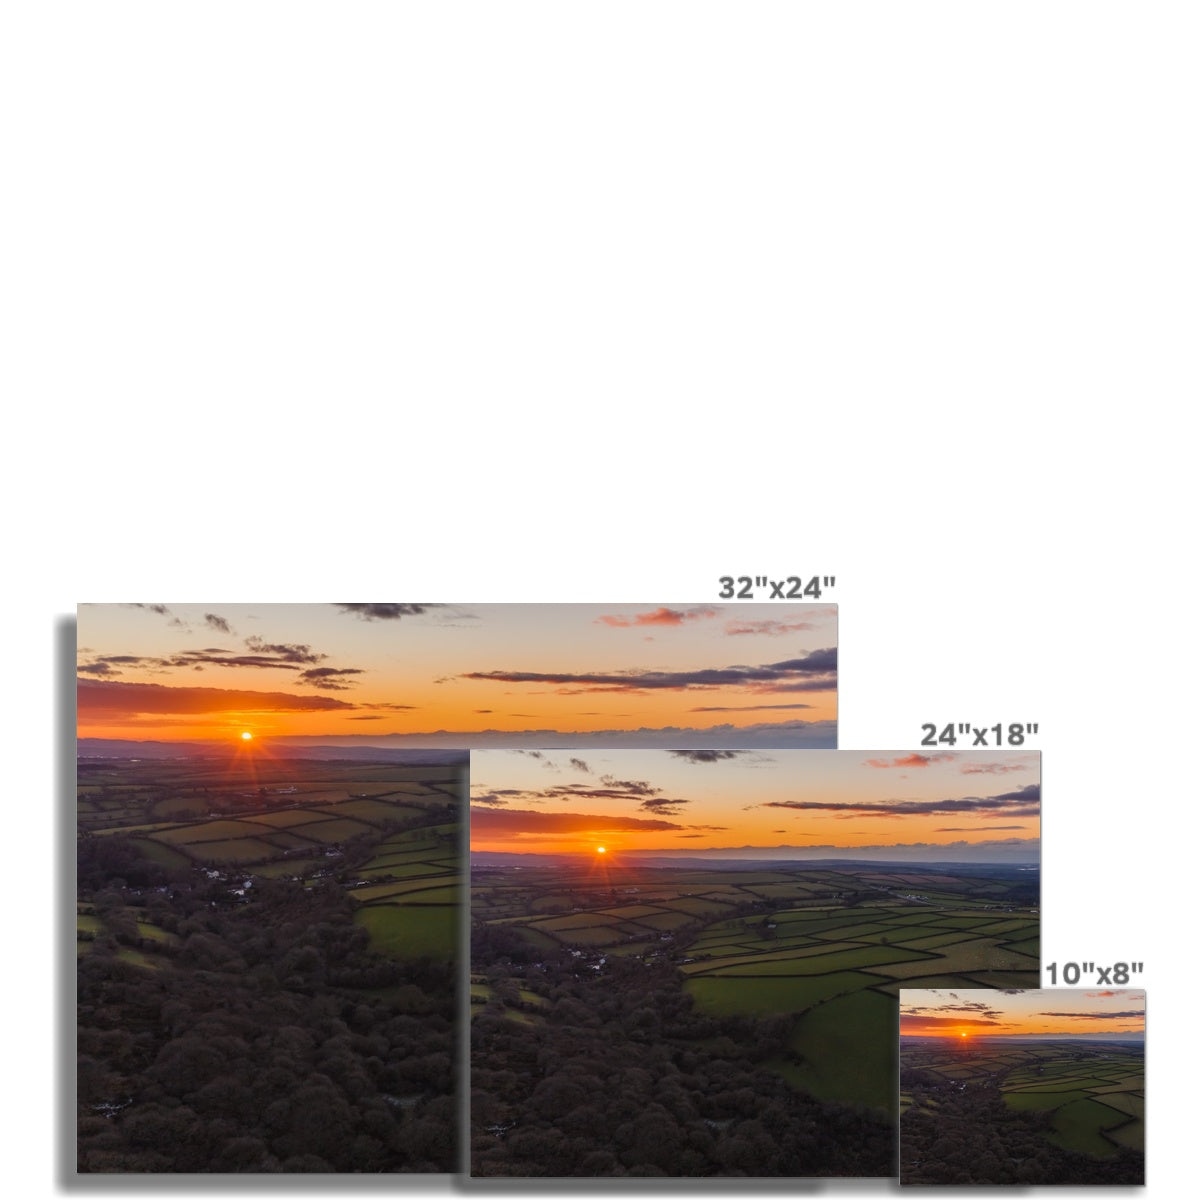 millpool sunset bodmin moor picture sizes